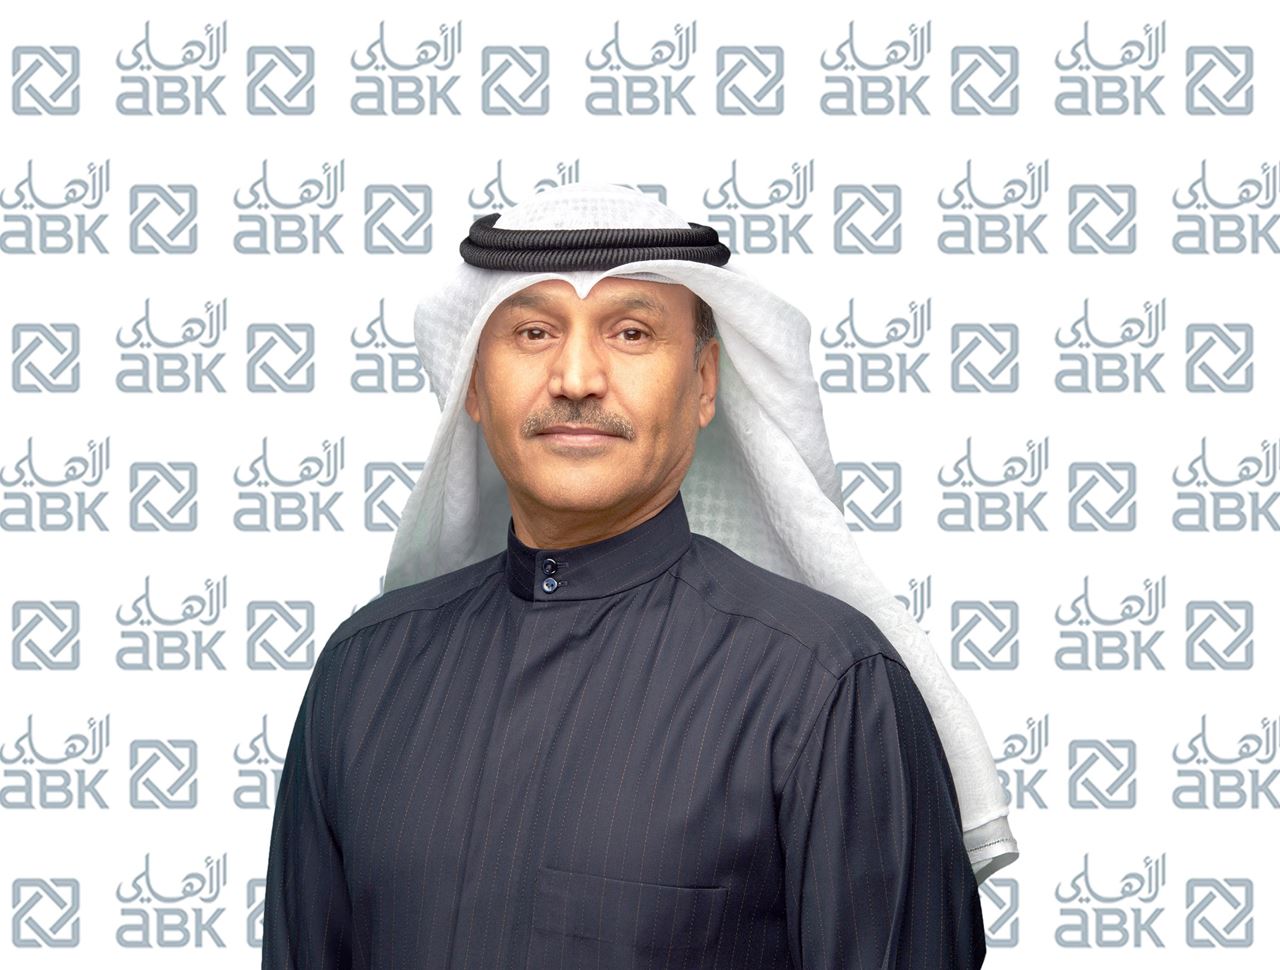 Mr. Mohammad Al Bloushi, General Manager of Operations at ABK